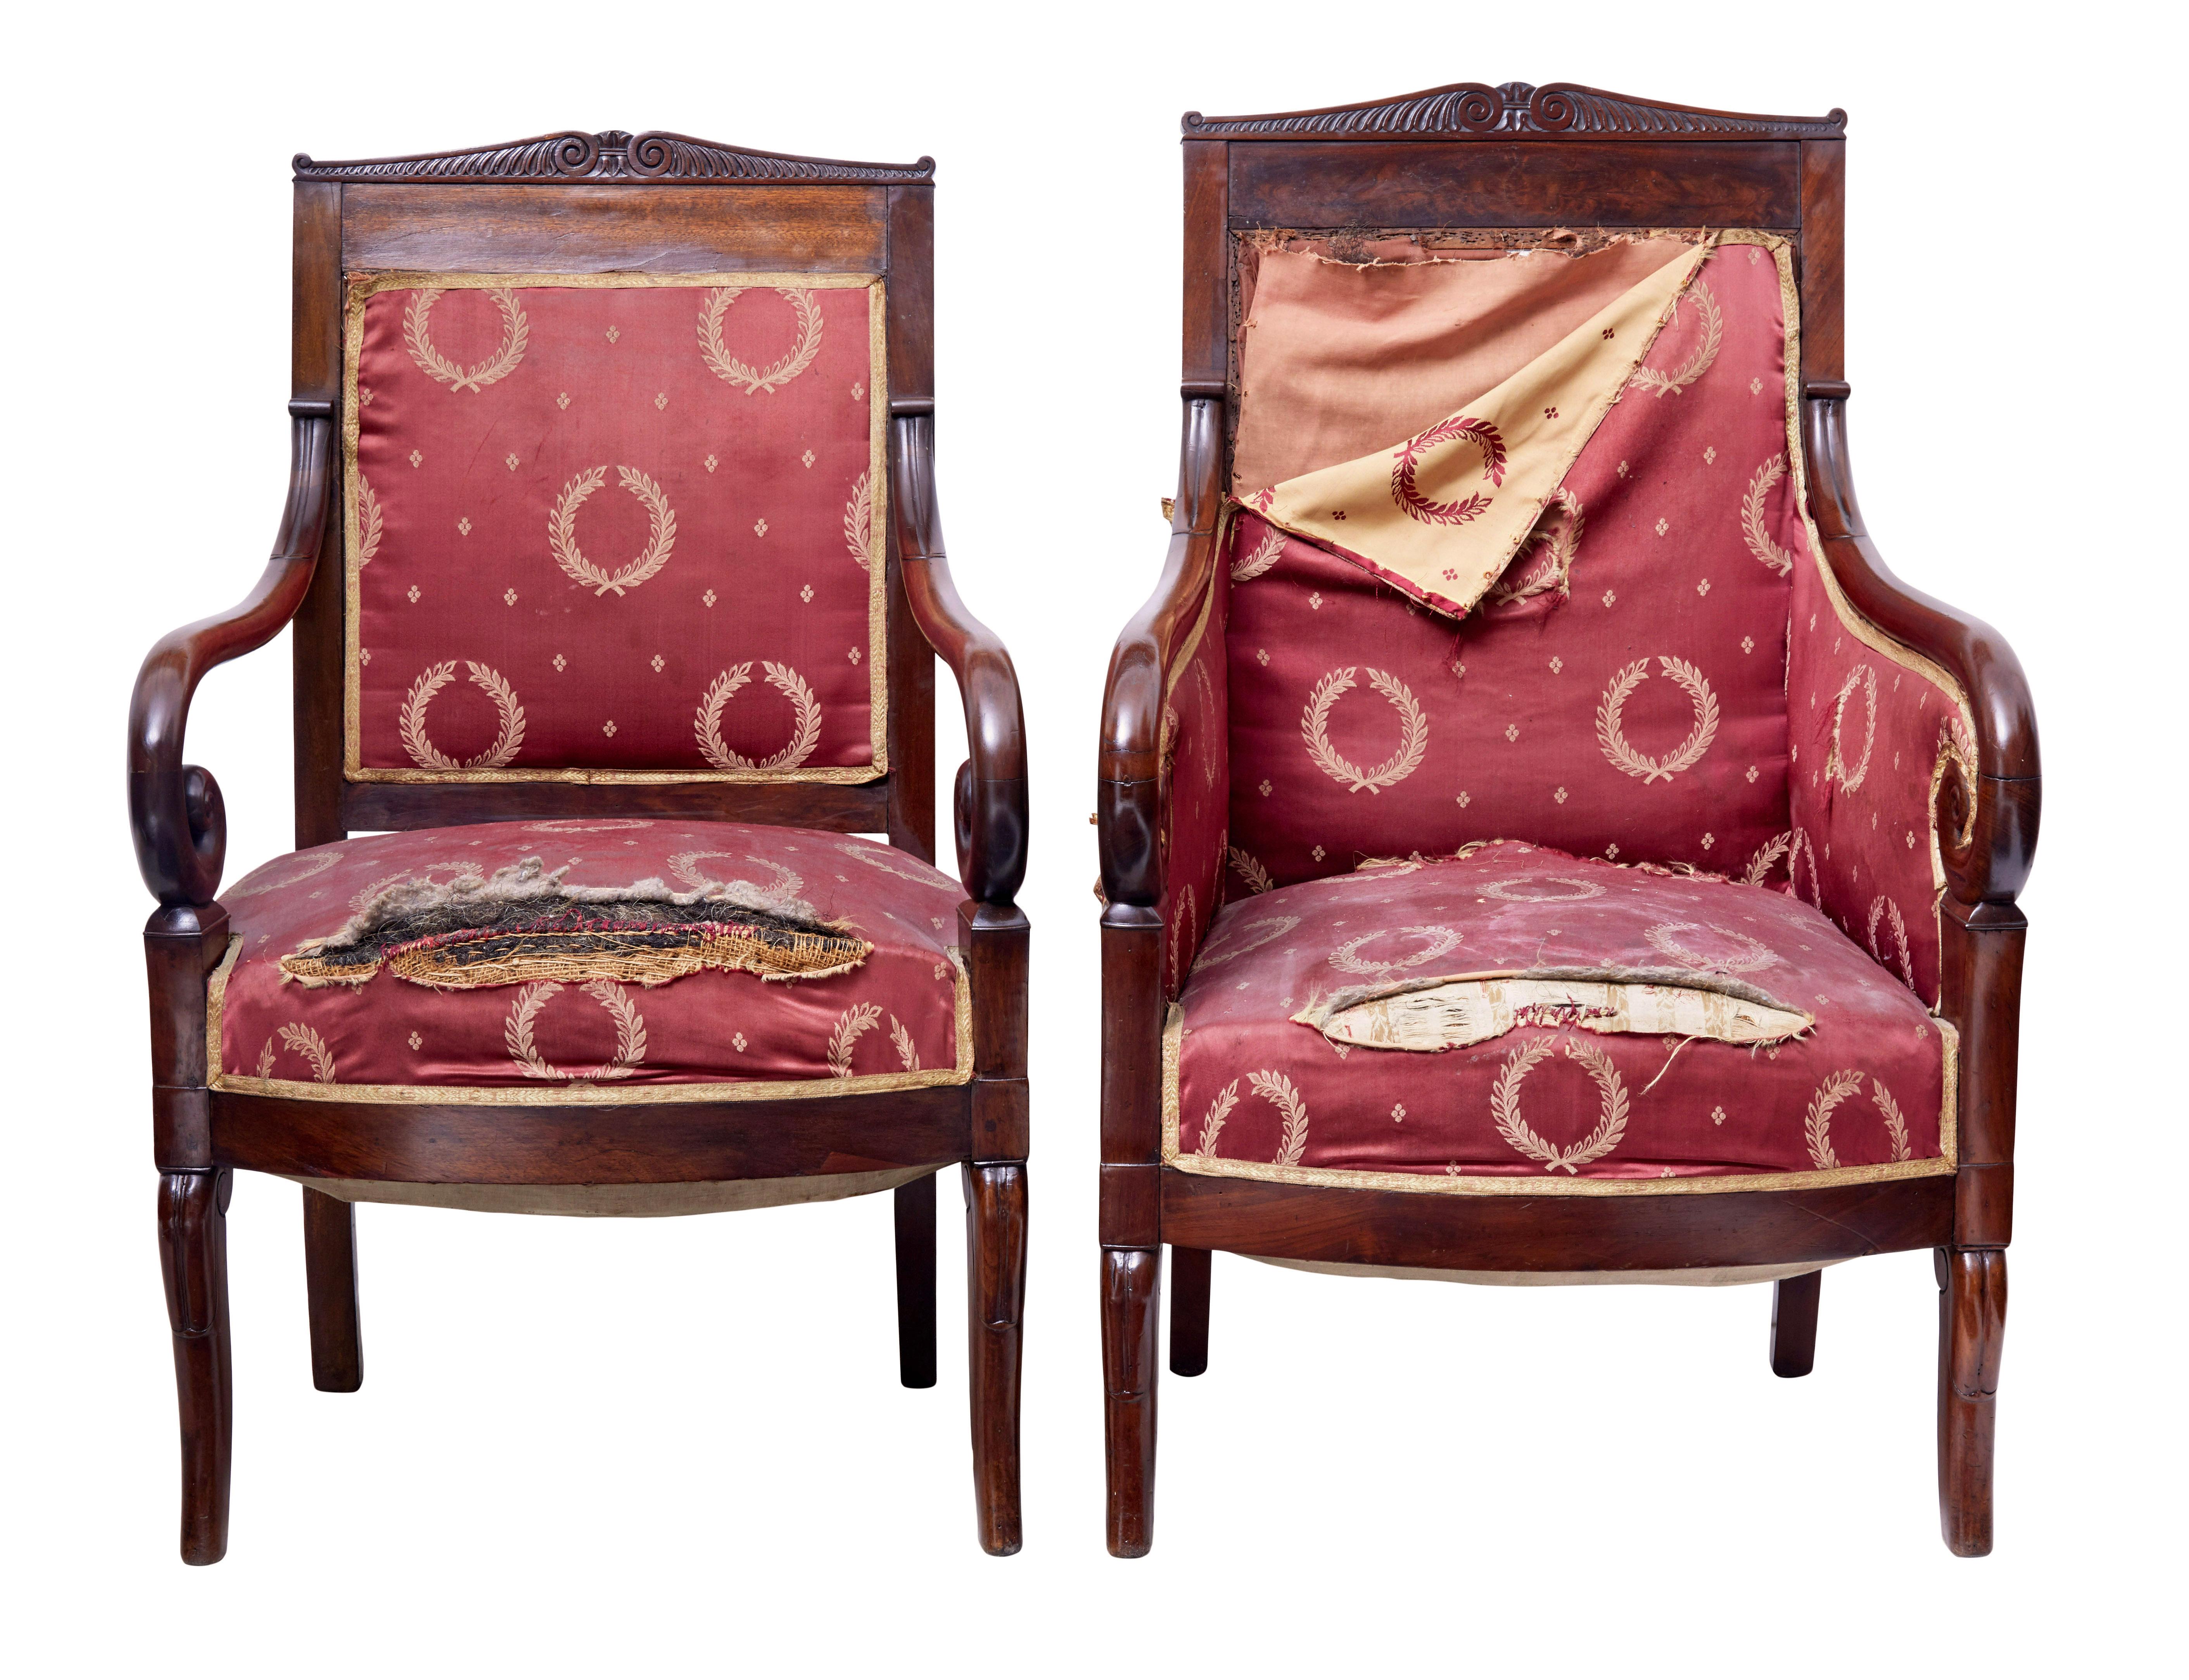 Beautiful set of 4 Danish empire armchairs circa 1860.

Comprising of 2 armchairs and 2 open frame armchairs.  Main feature being the scrolling arm and scrolling front leg.  Carved back rail with padded back rest insert and overstuffed